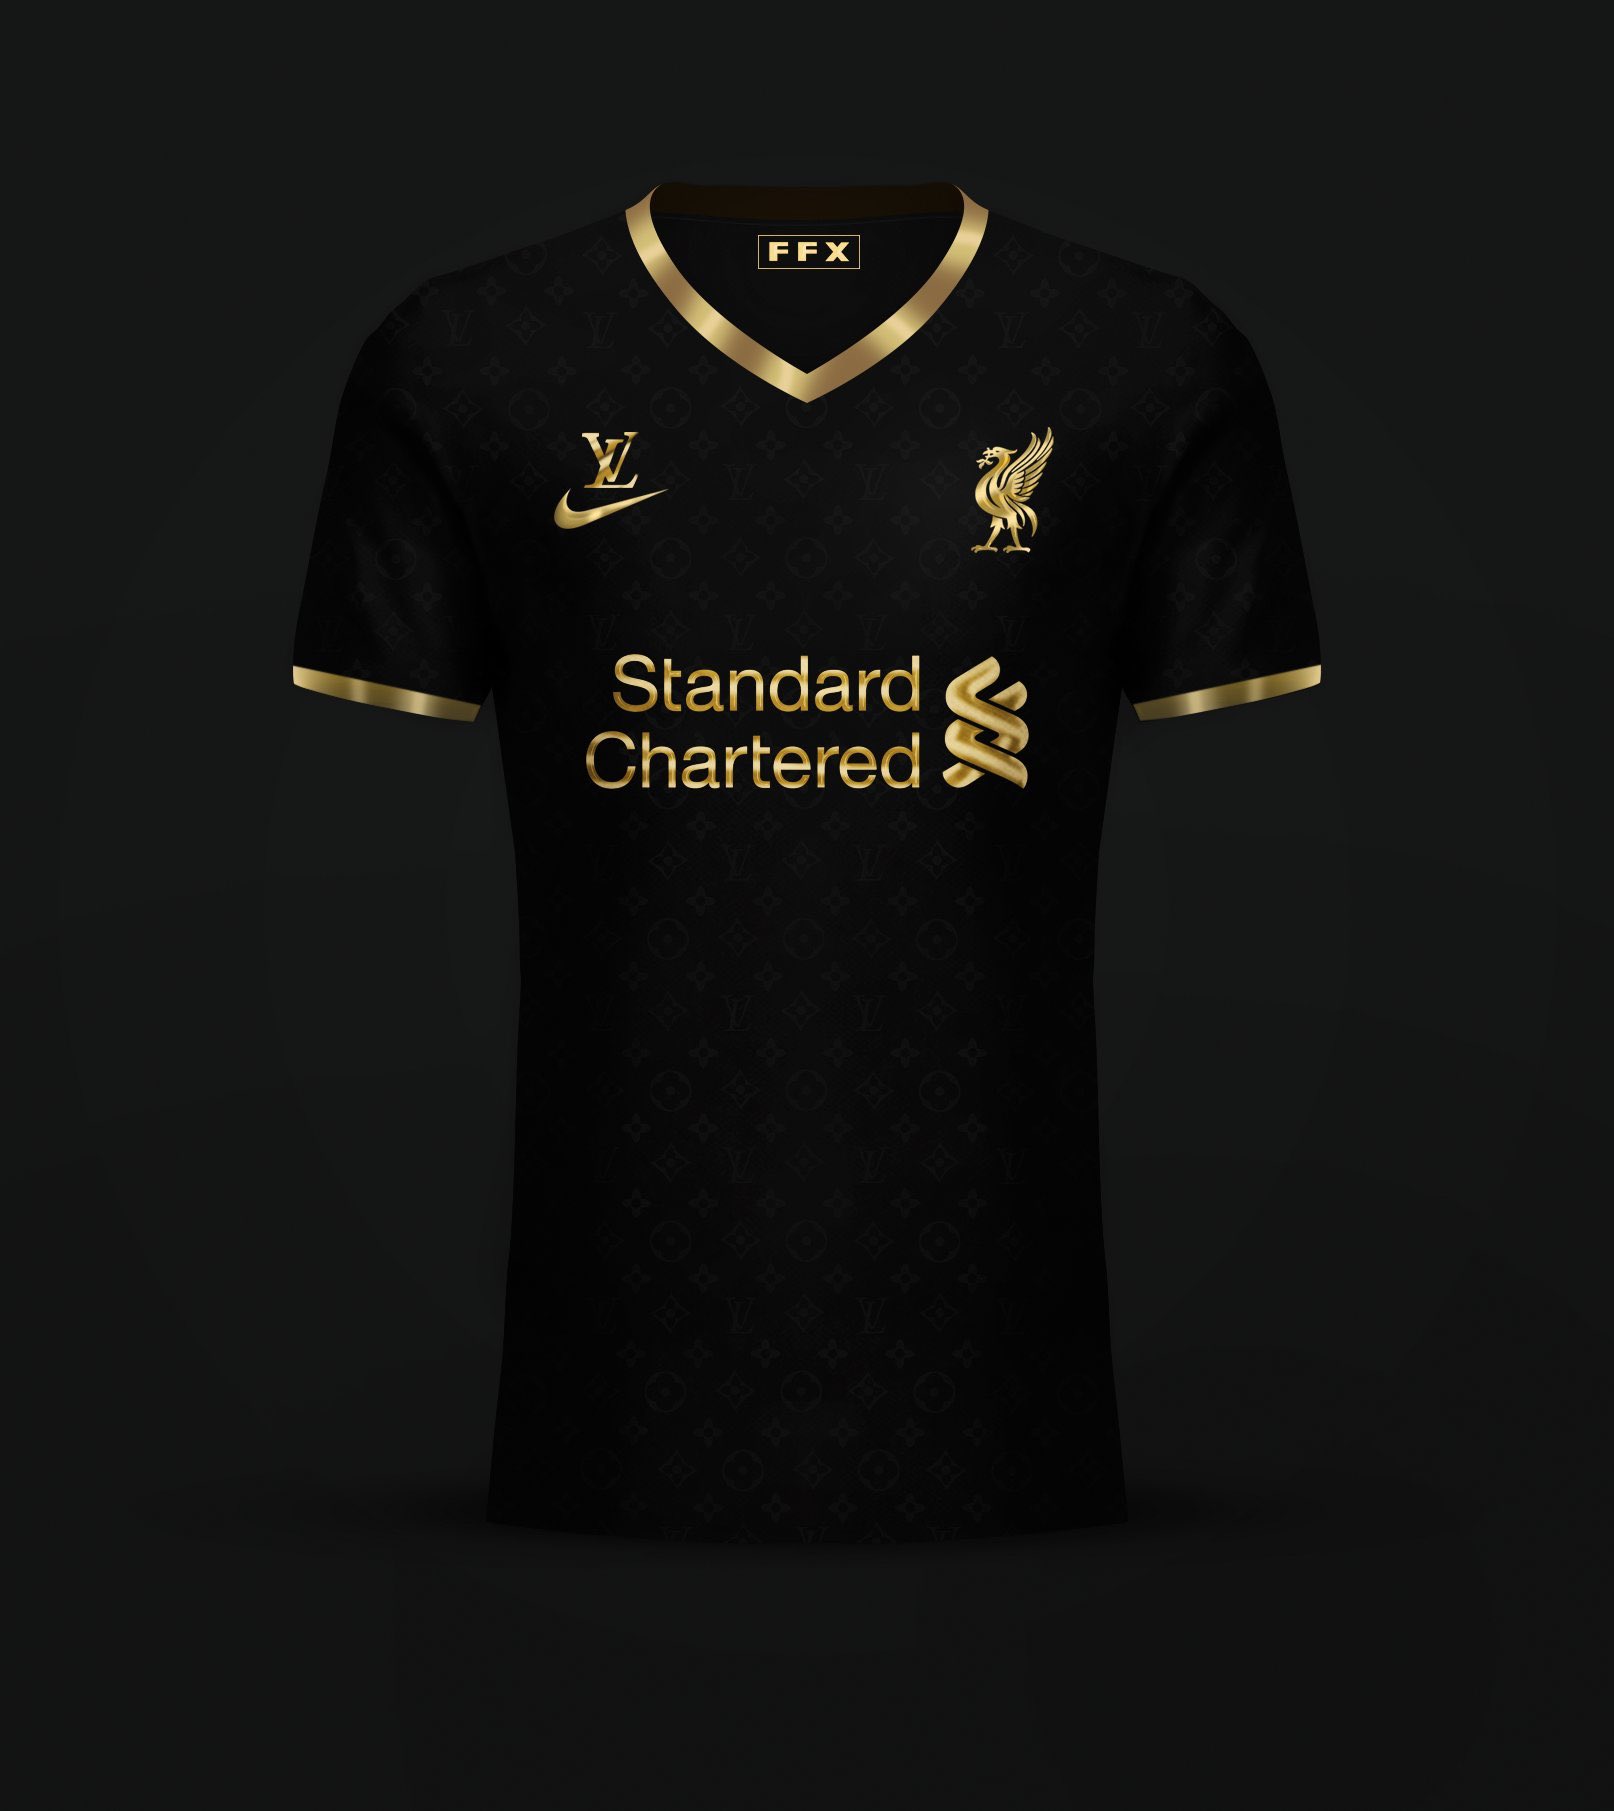 hout muis of rat Machtig Jack Armstrong on Twitter: "Liverpool Nike x Louis Vuitton Black and gold  kit Let me know your thoughts. https://t.co/NR3ykByb2R" / X